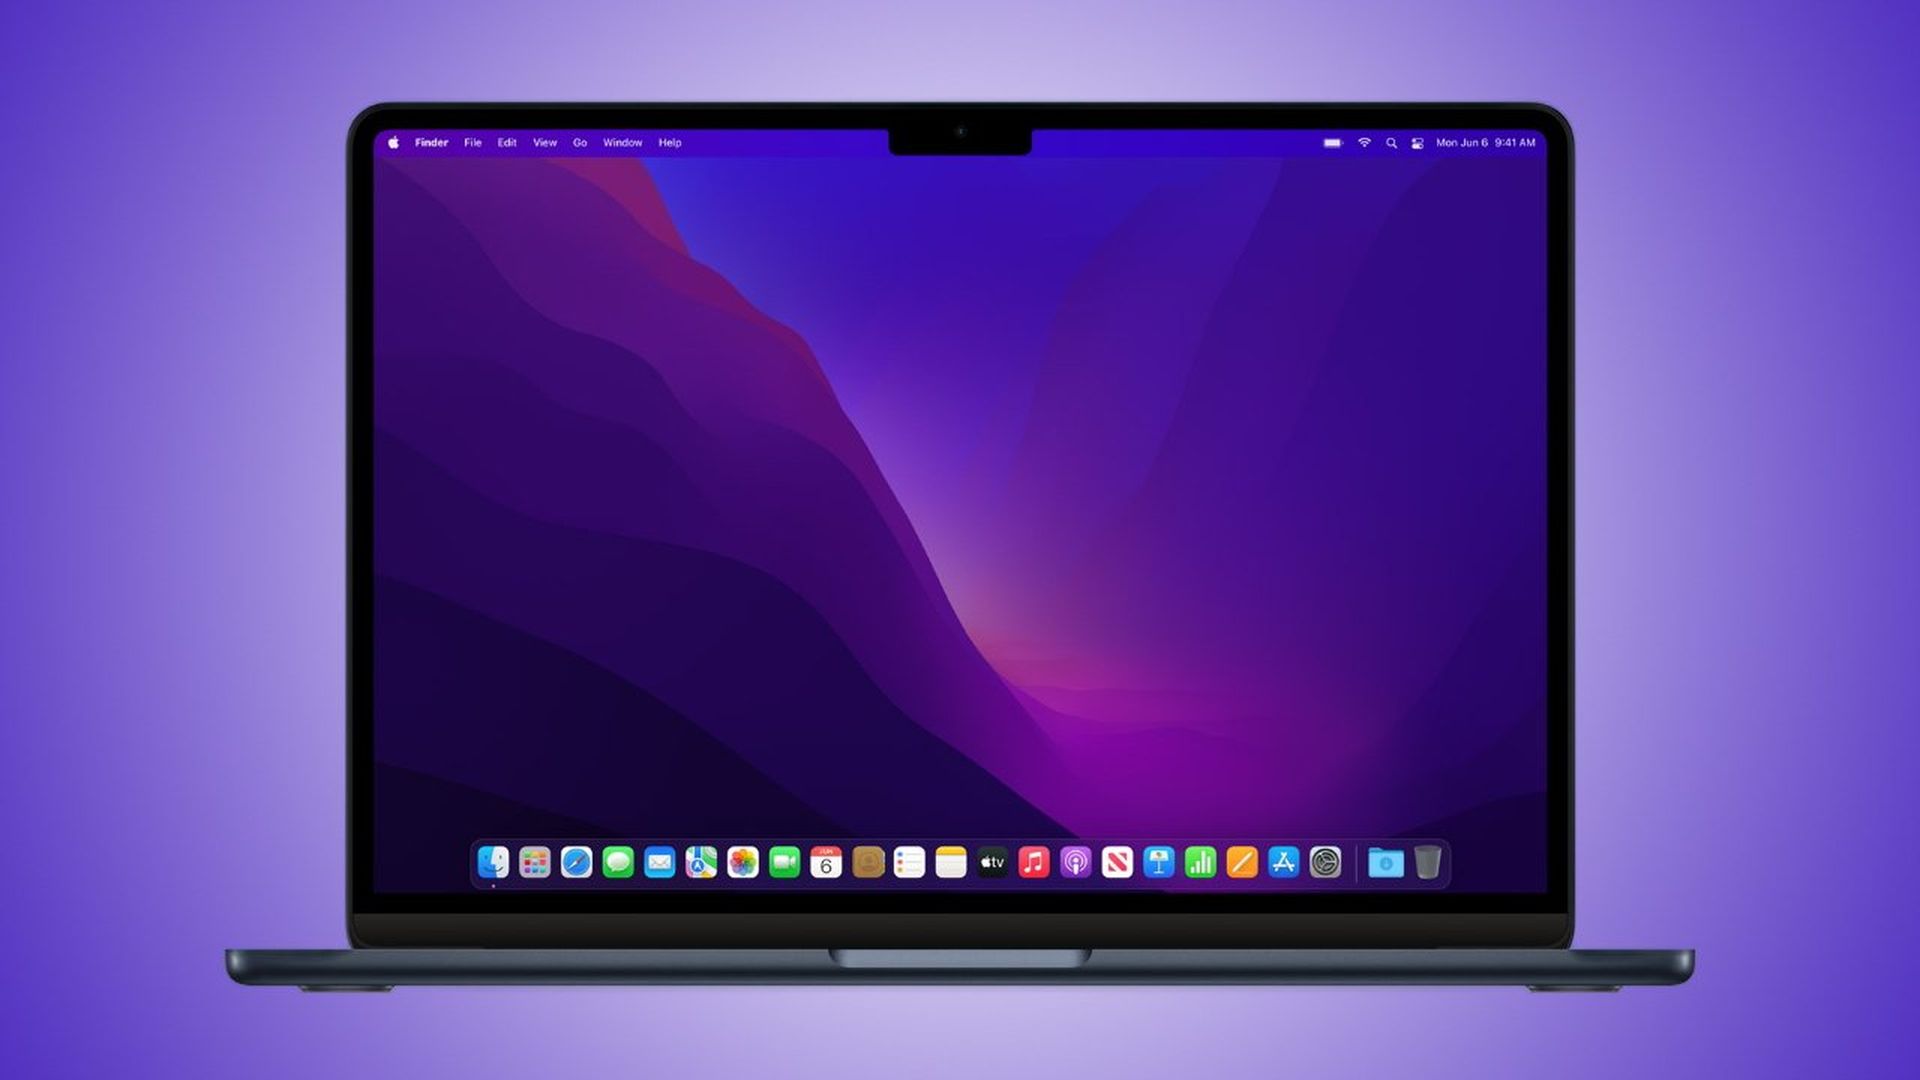 In this article, we are covering Windows vs macOS, and will tell you which one is better on which front, so you can make an informed decision on which to use.